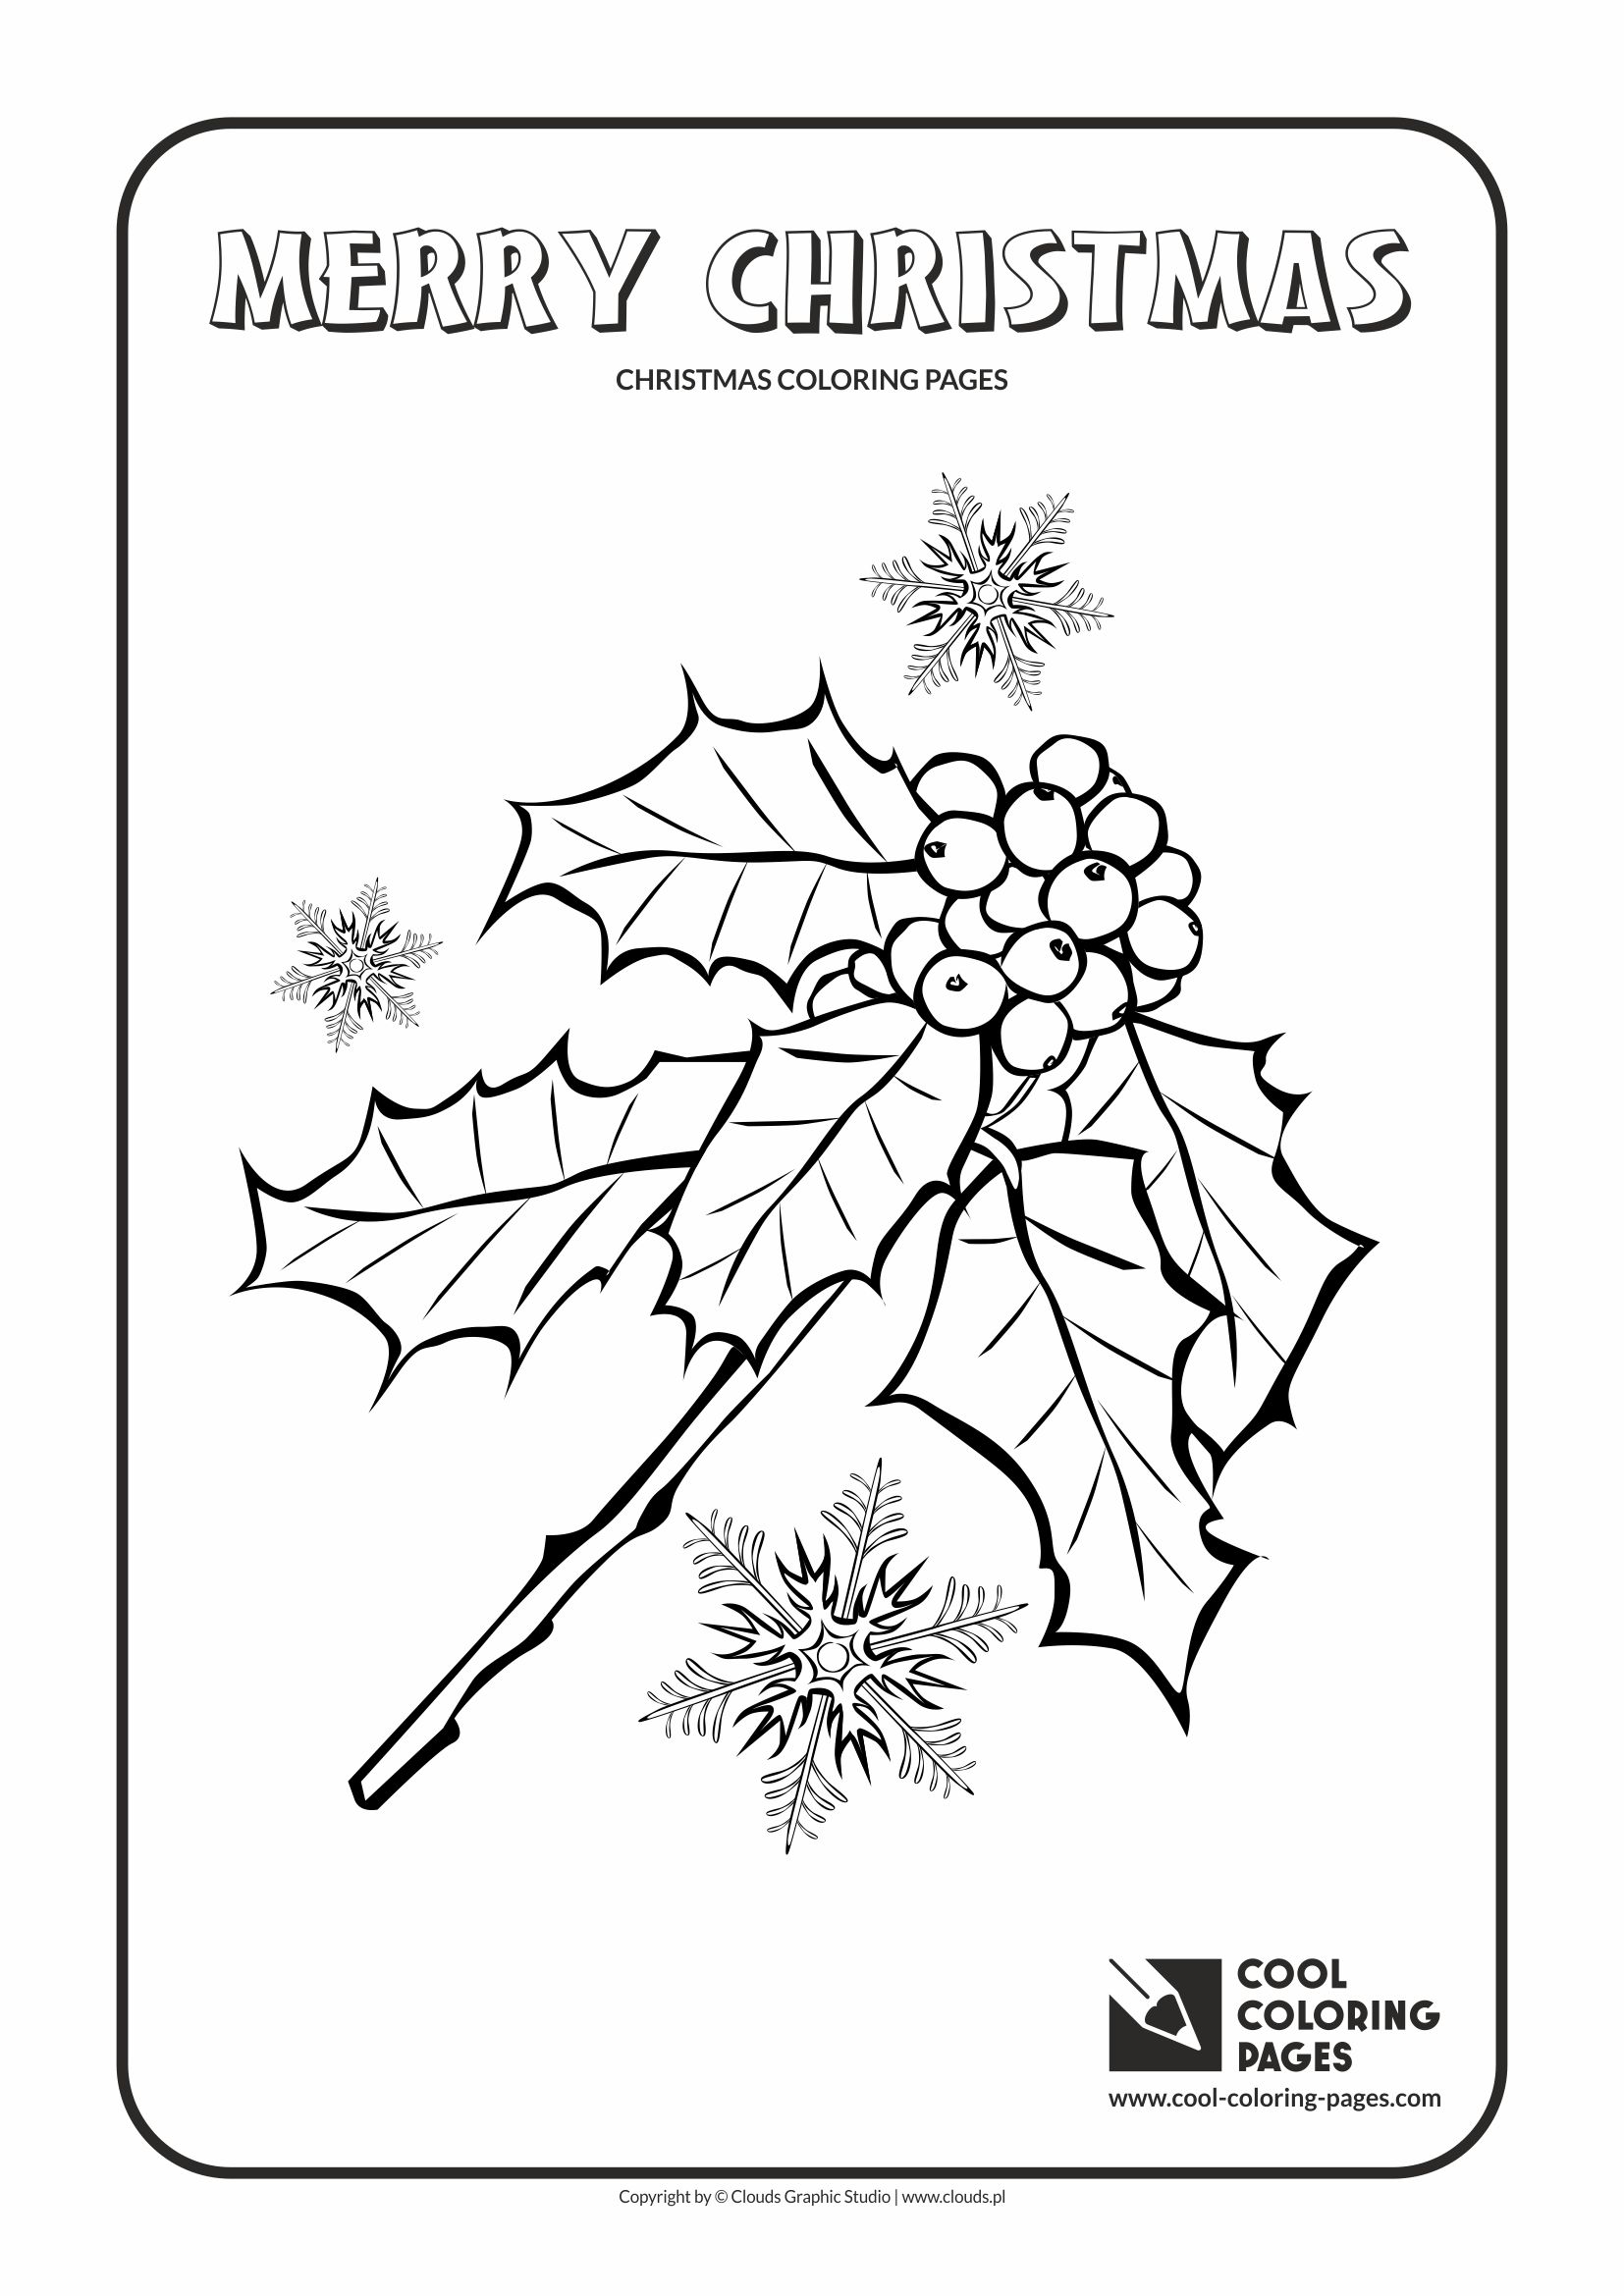 Cool Coloring Pages - Holidays / Holly Berries / Coloring page with Holly Berries